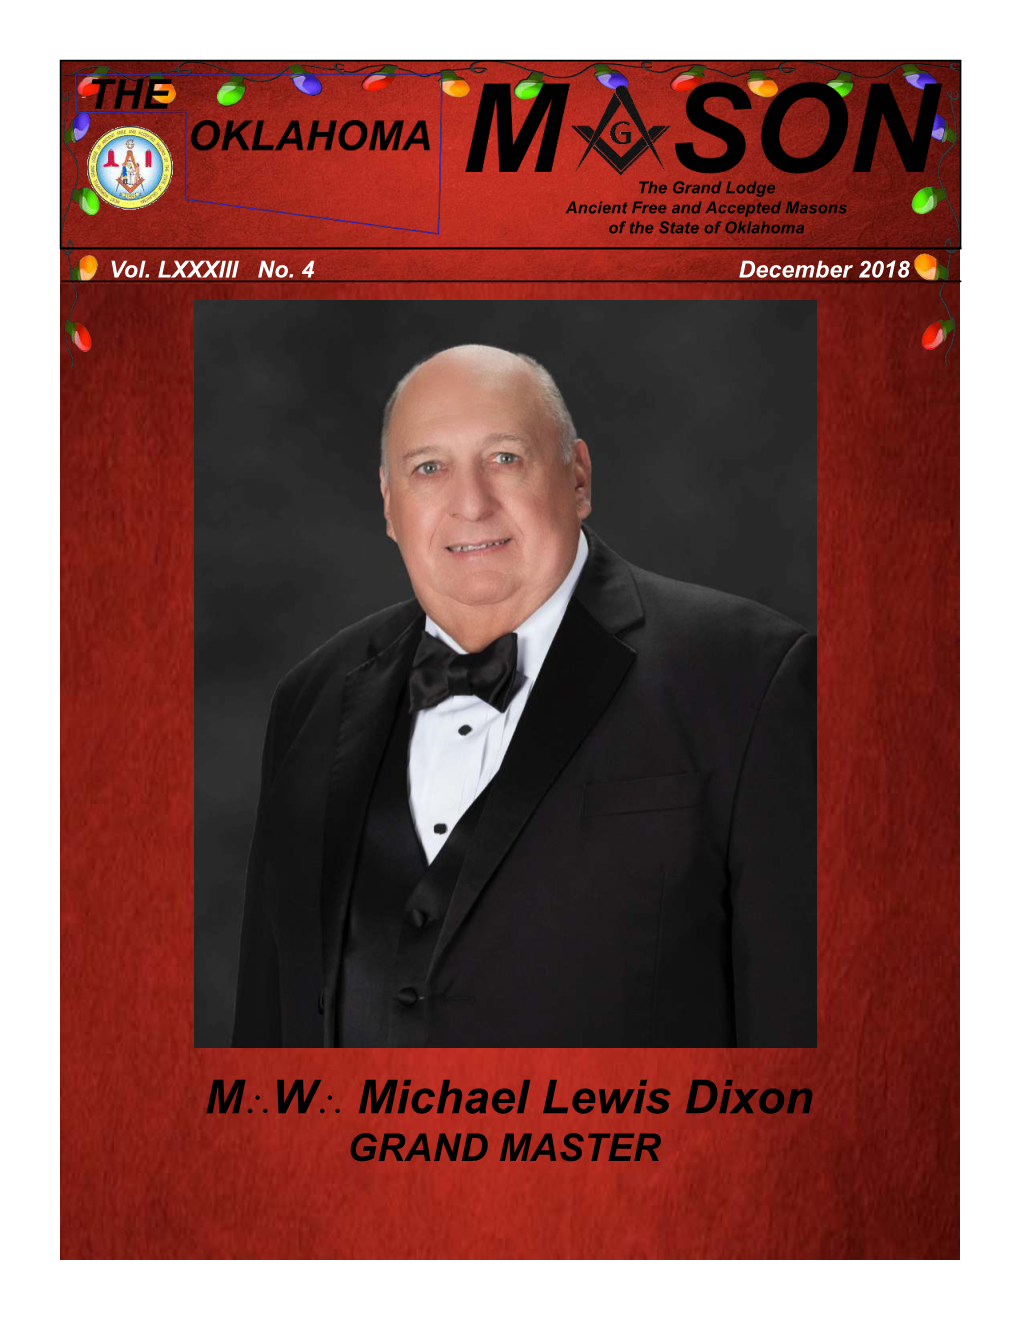 M∴W∴ Michael Lewis Dixon GRAND MASTER M∴W∴ Michael Lewis Dixon Biography Mike Dixon Lives in Edmond, Oklahoma with His Wife of 29 Years, Karen